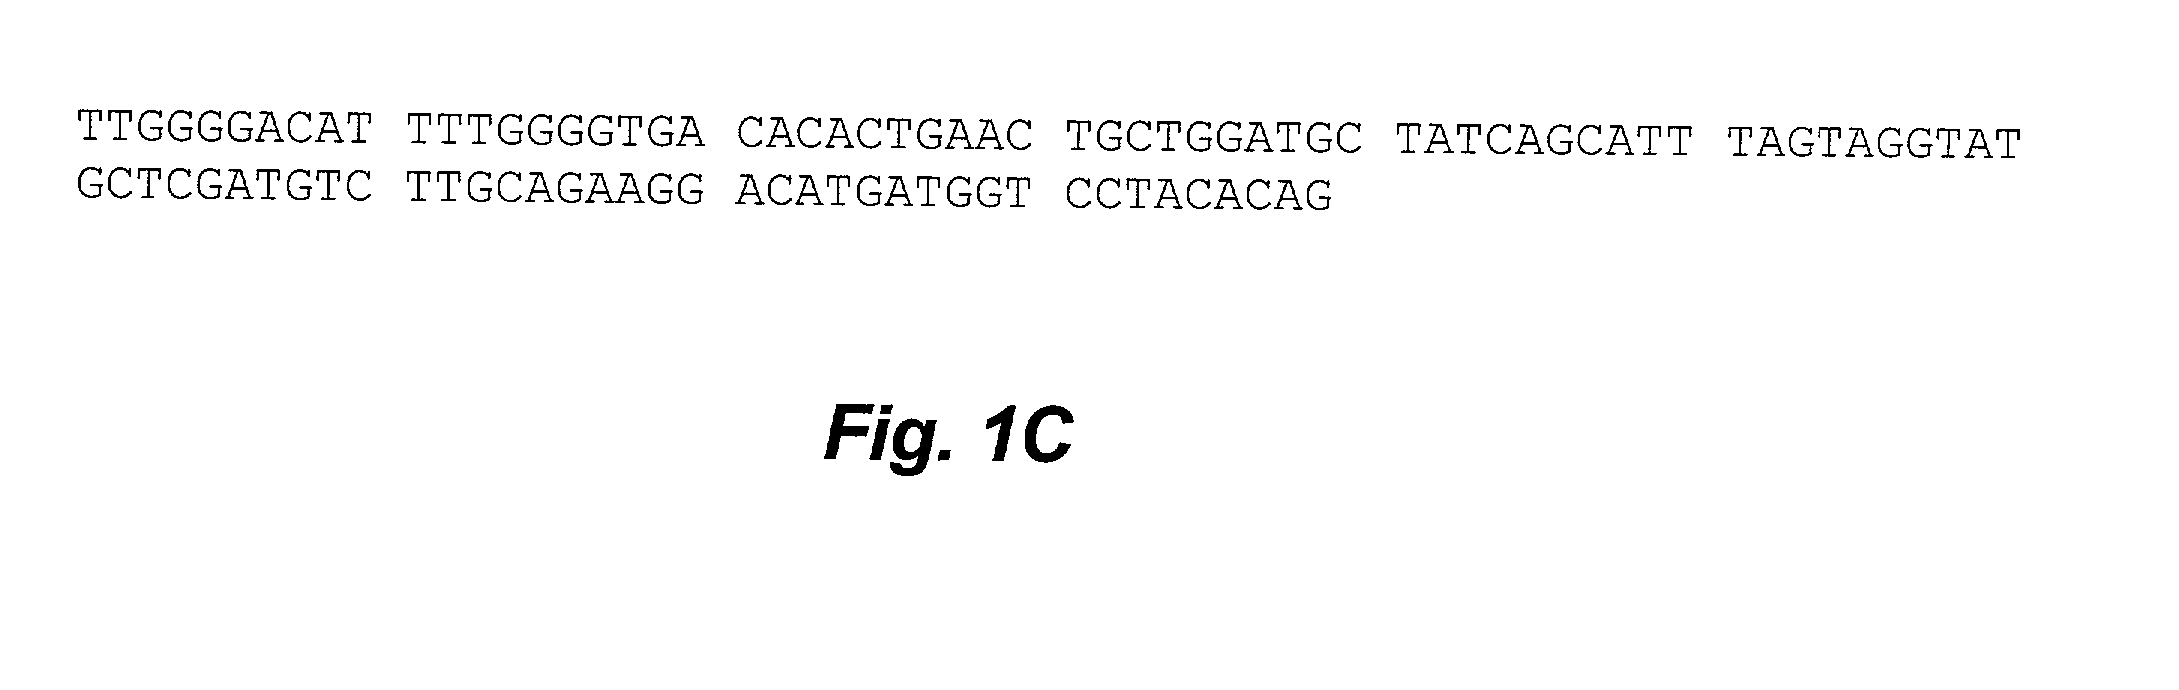 Methods and use of motoneuronotrophic factors